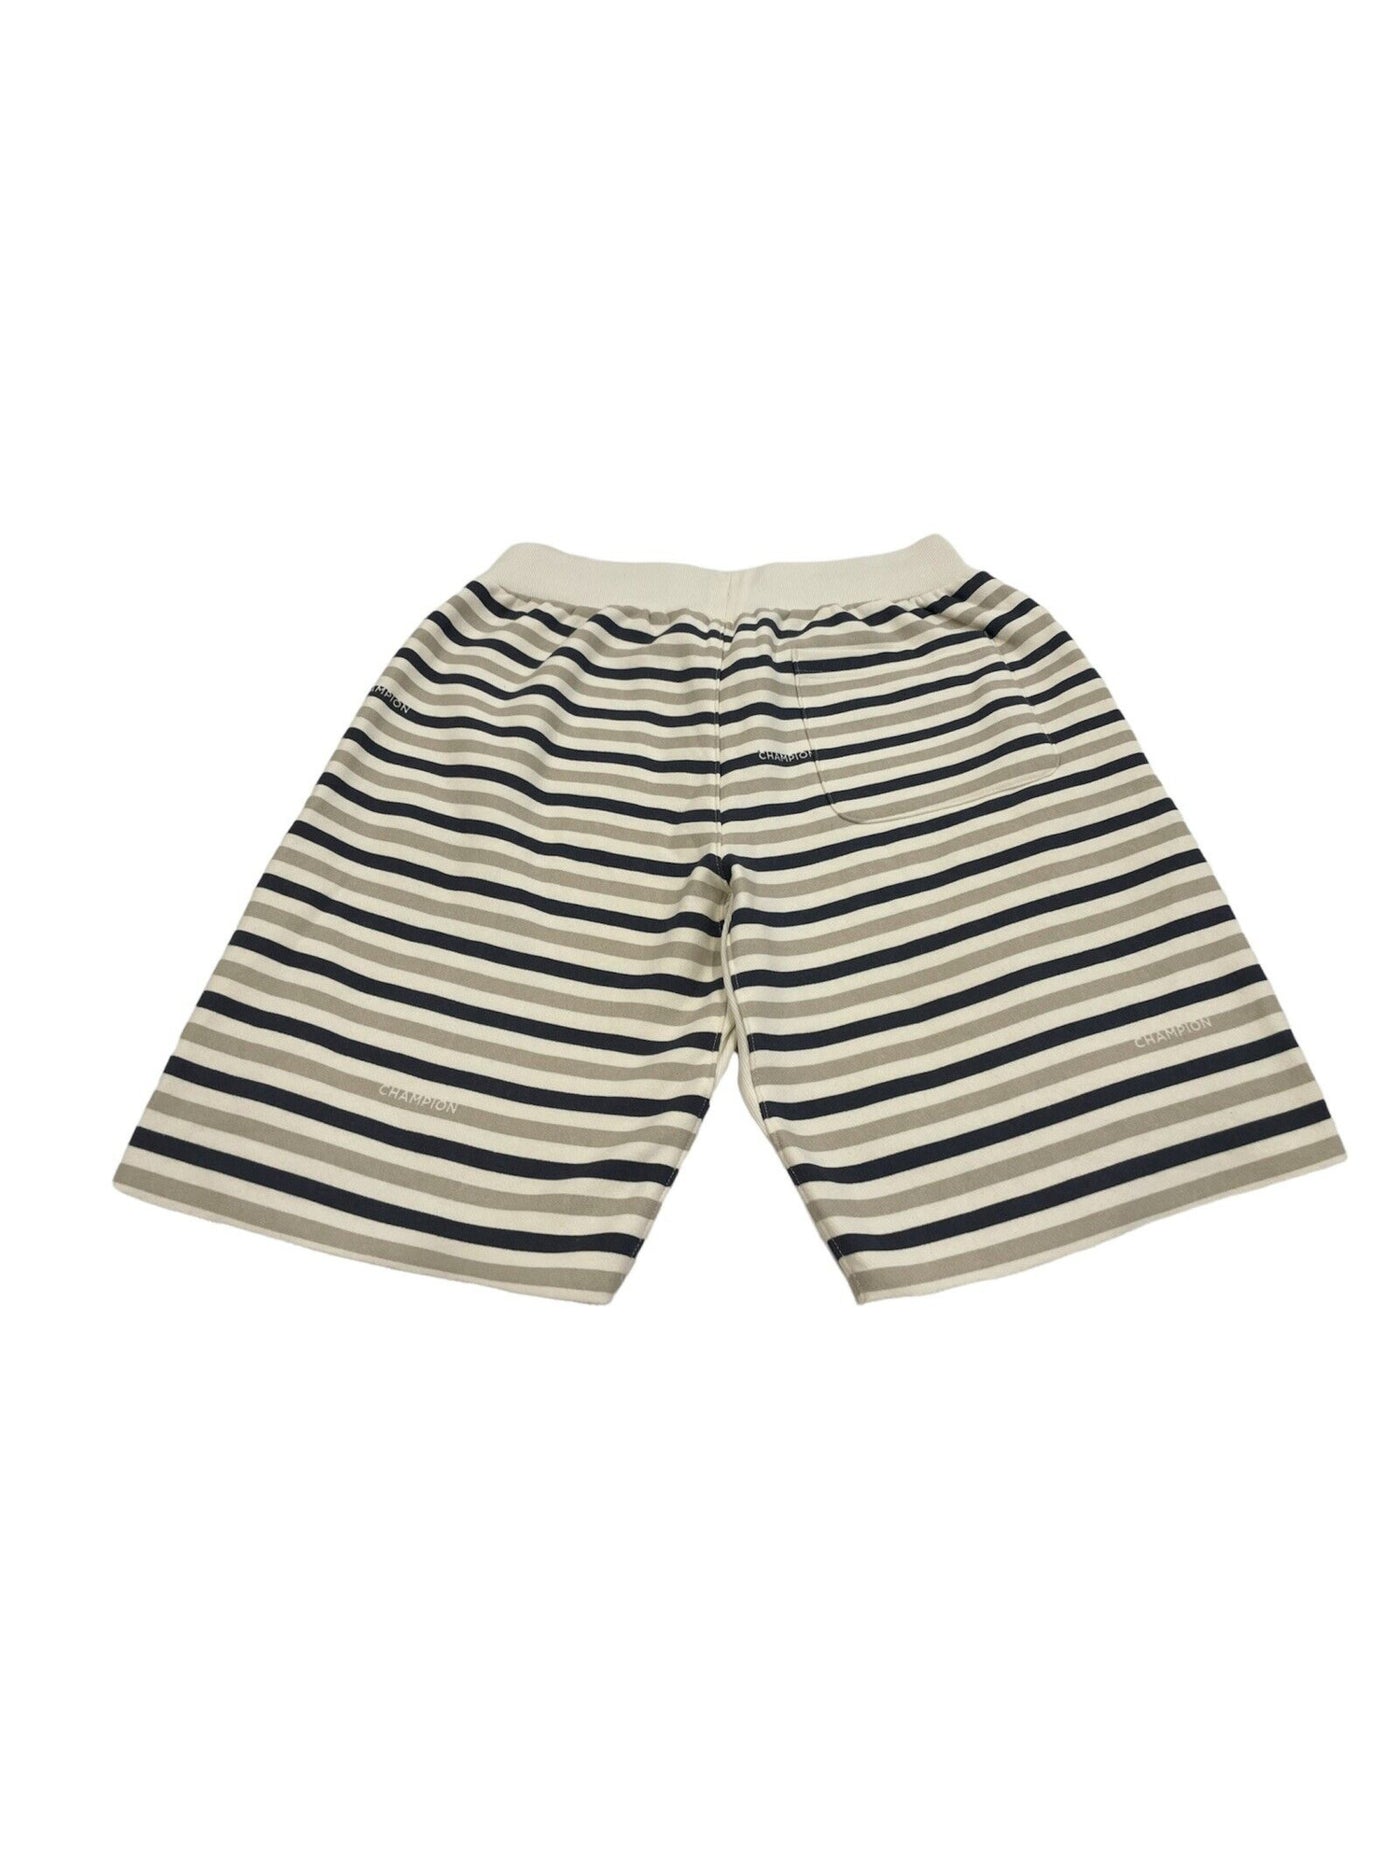 CHAMPION Mens Beige Striped Classic Fit Lounge Shorts S